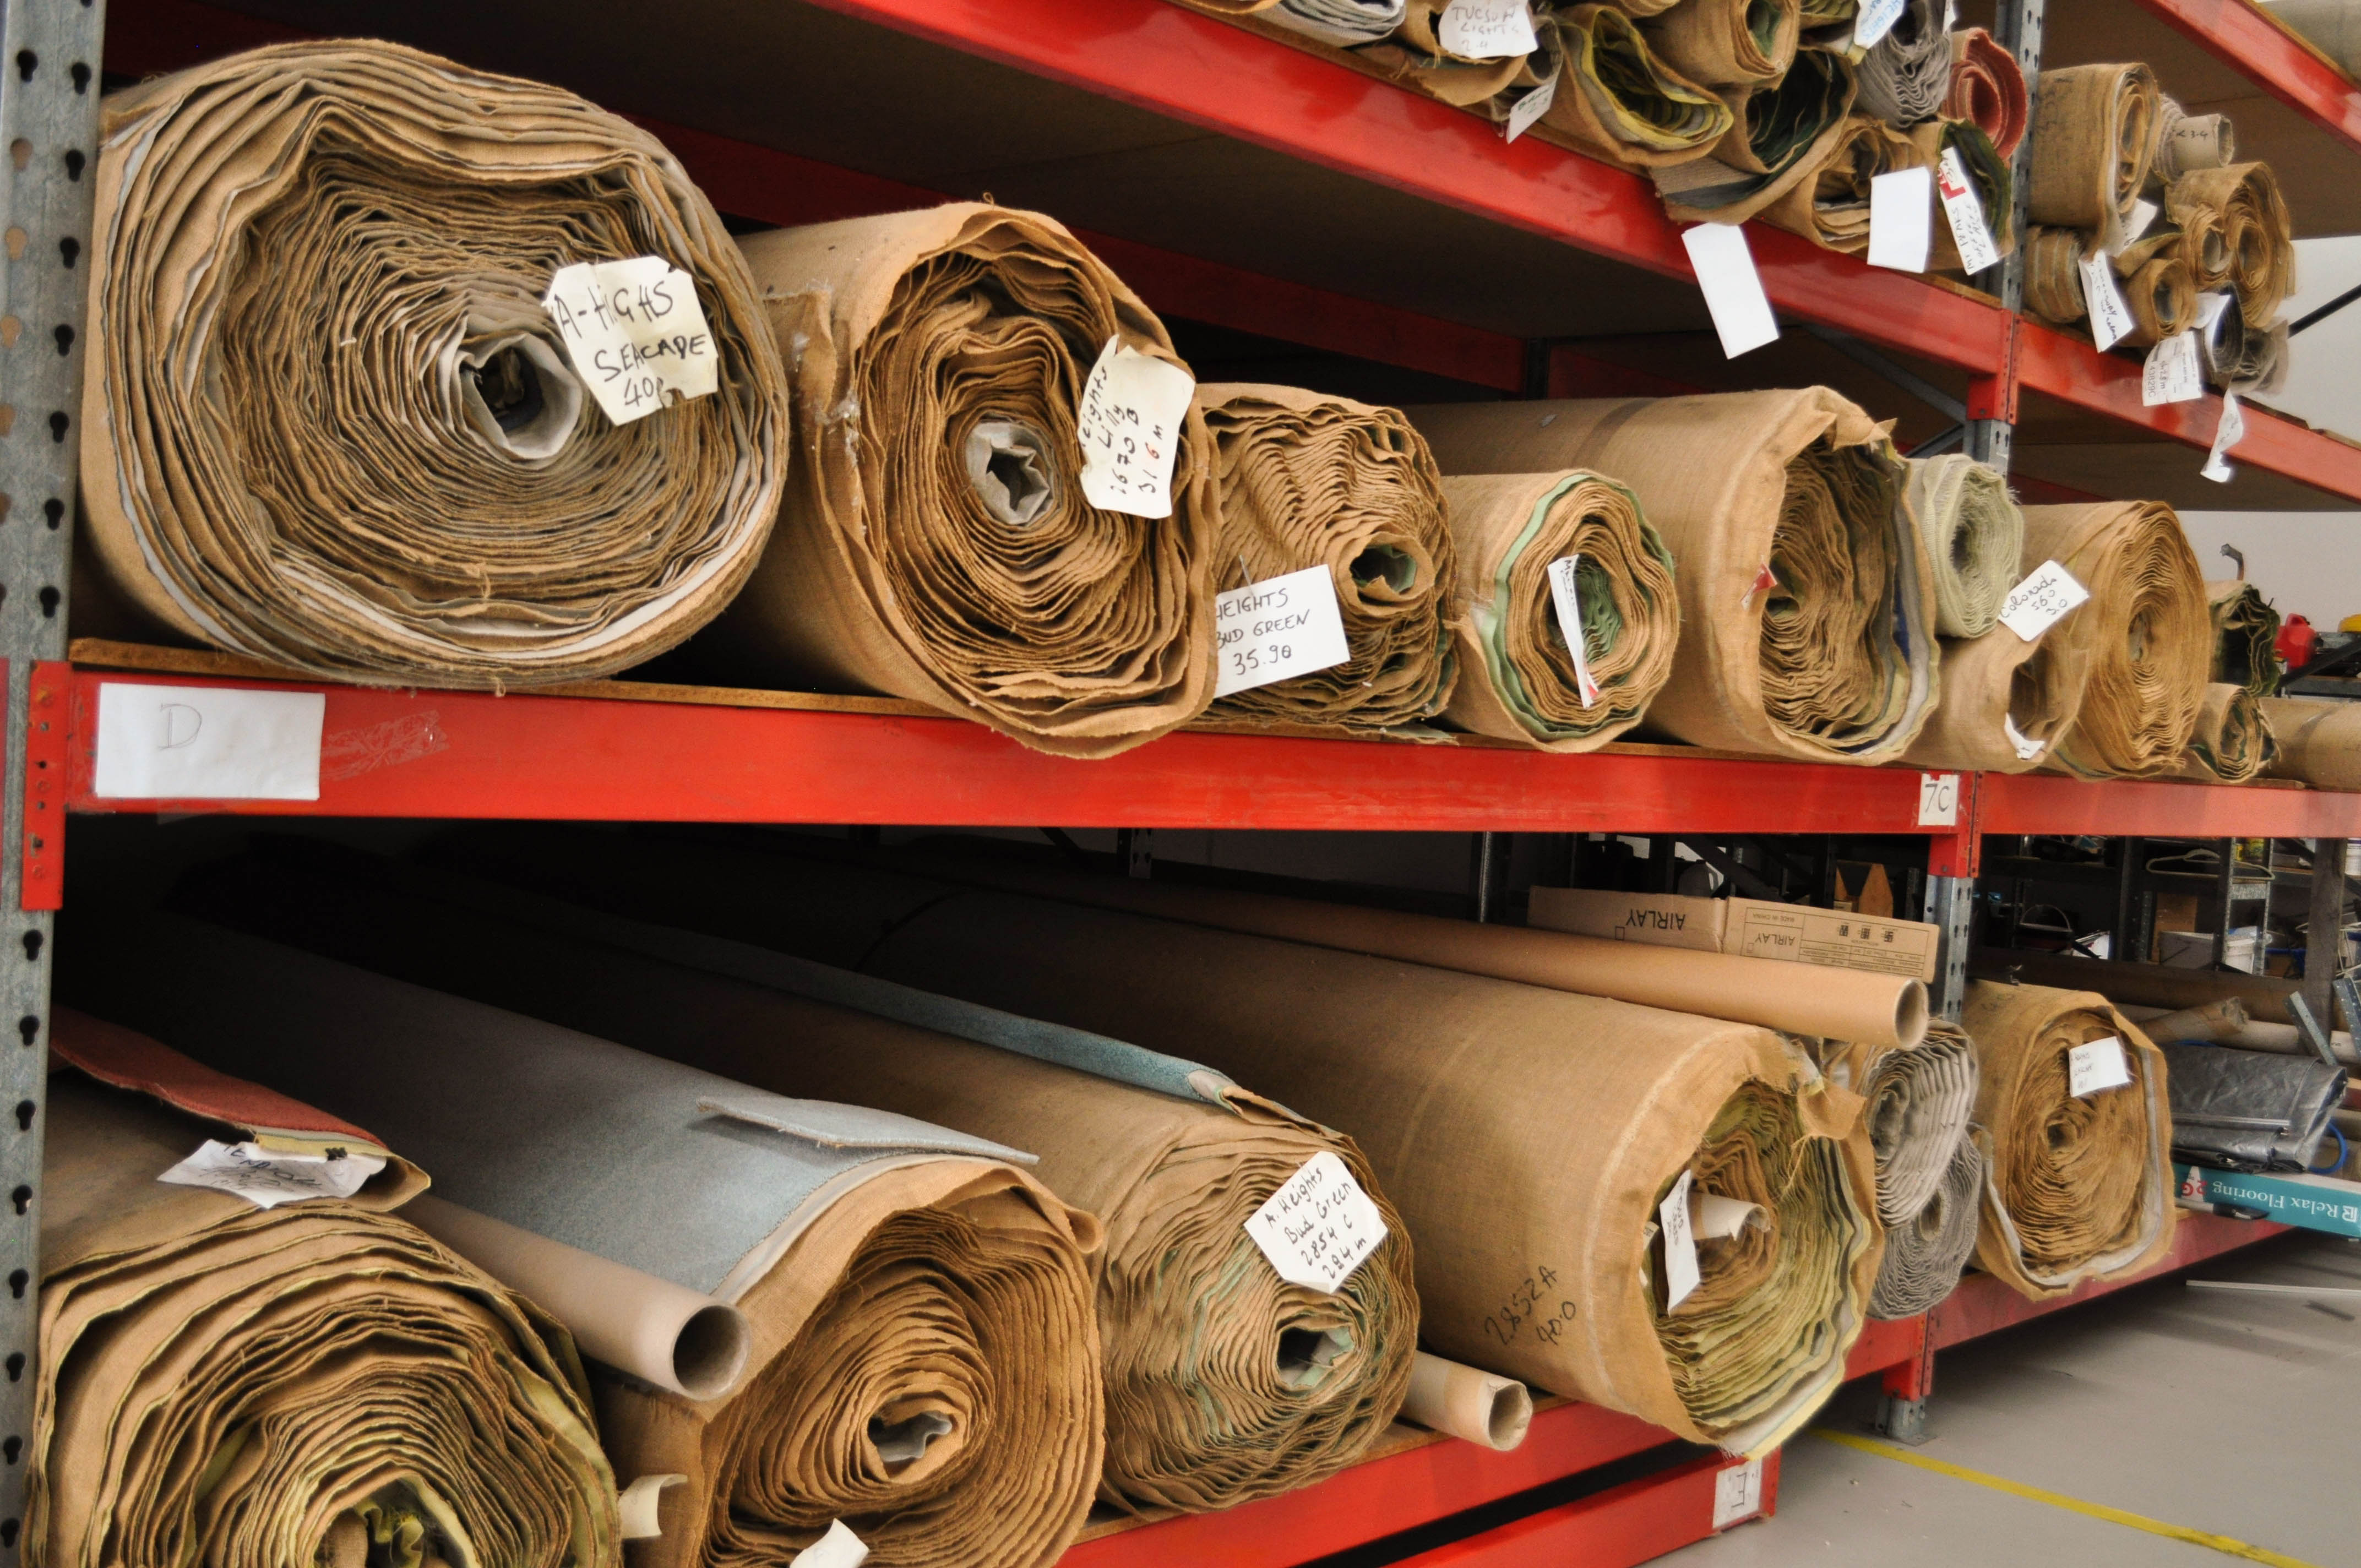 Concord Floor's warehouse storage facilities showing carpet storage racks with rolls of carpet in them